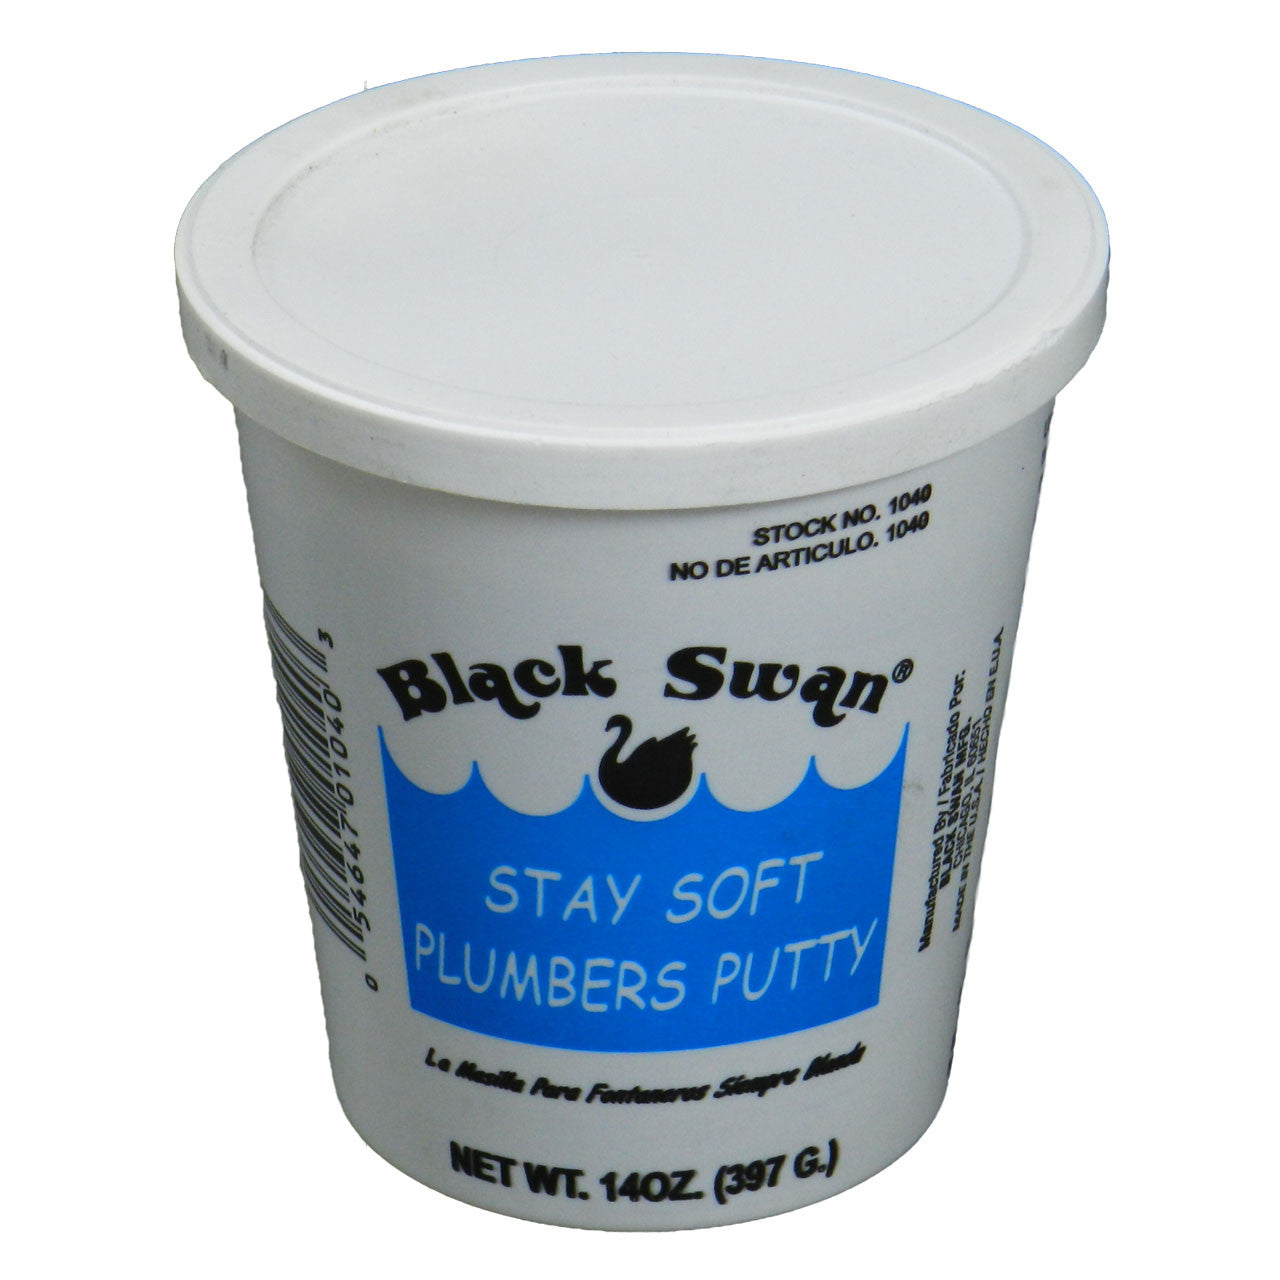 Plumber's Putty - Stainless - SALE 39% off